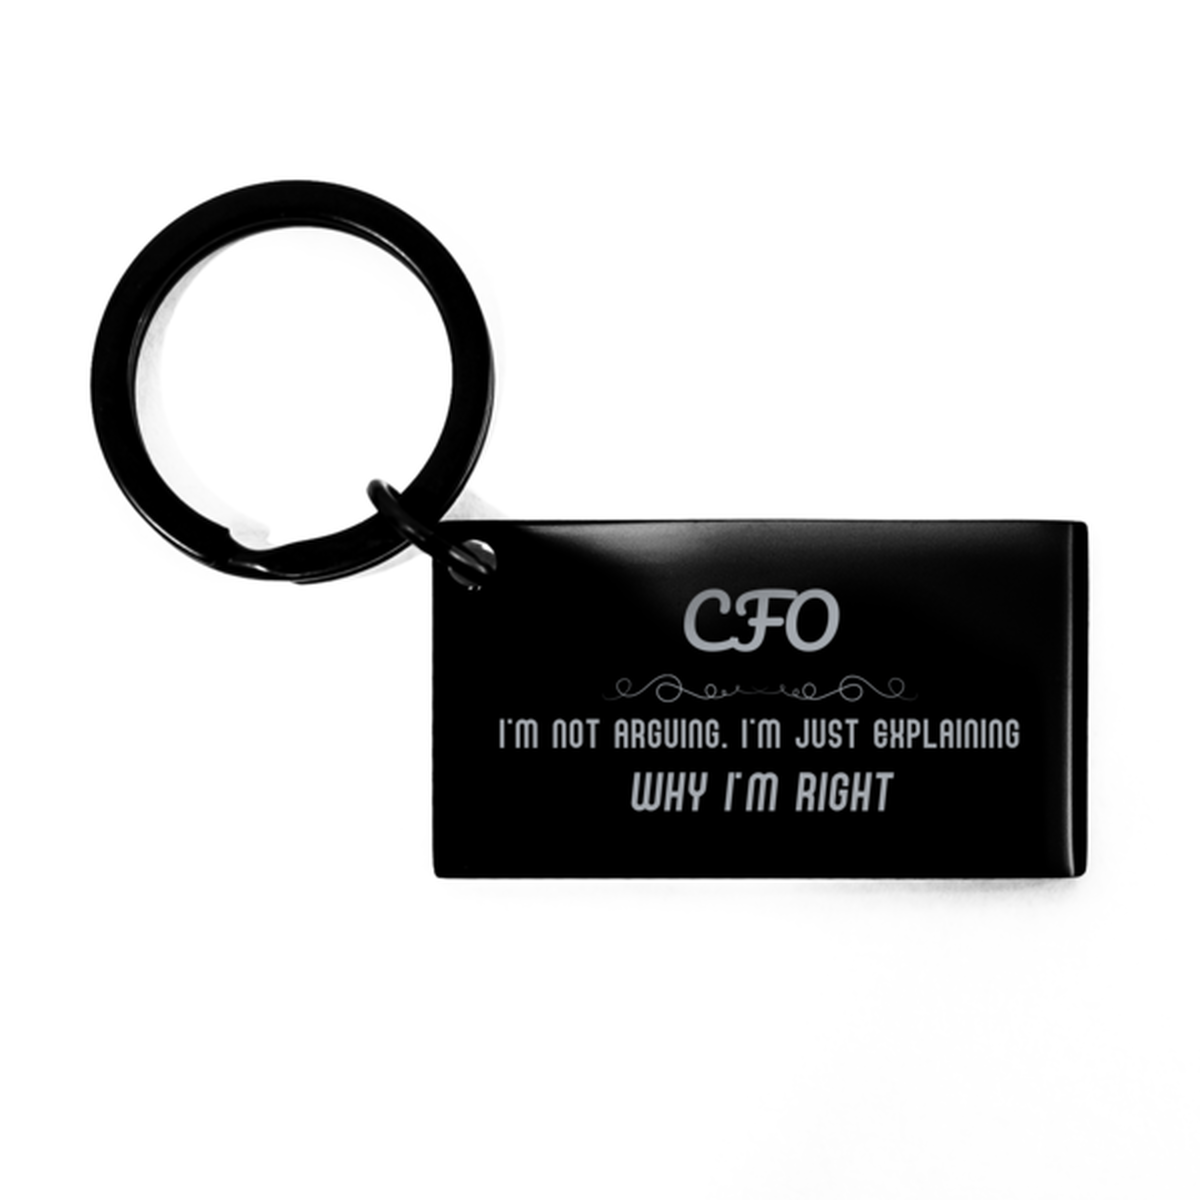 CFO I'm not Arguing. I'm Just Explaining Why I'm RIGHT Keychain, Funny Saying Quote CFO Gifts For CFO Graduation Birthday Christmas Gifts for Men Women Coworker